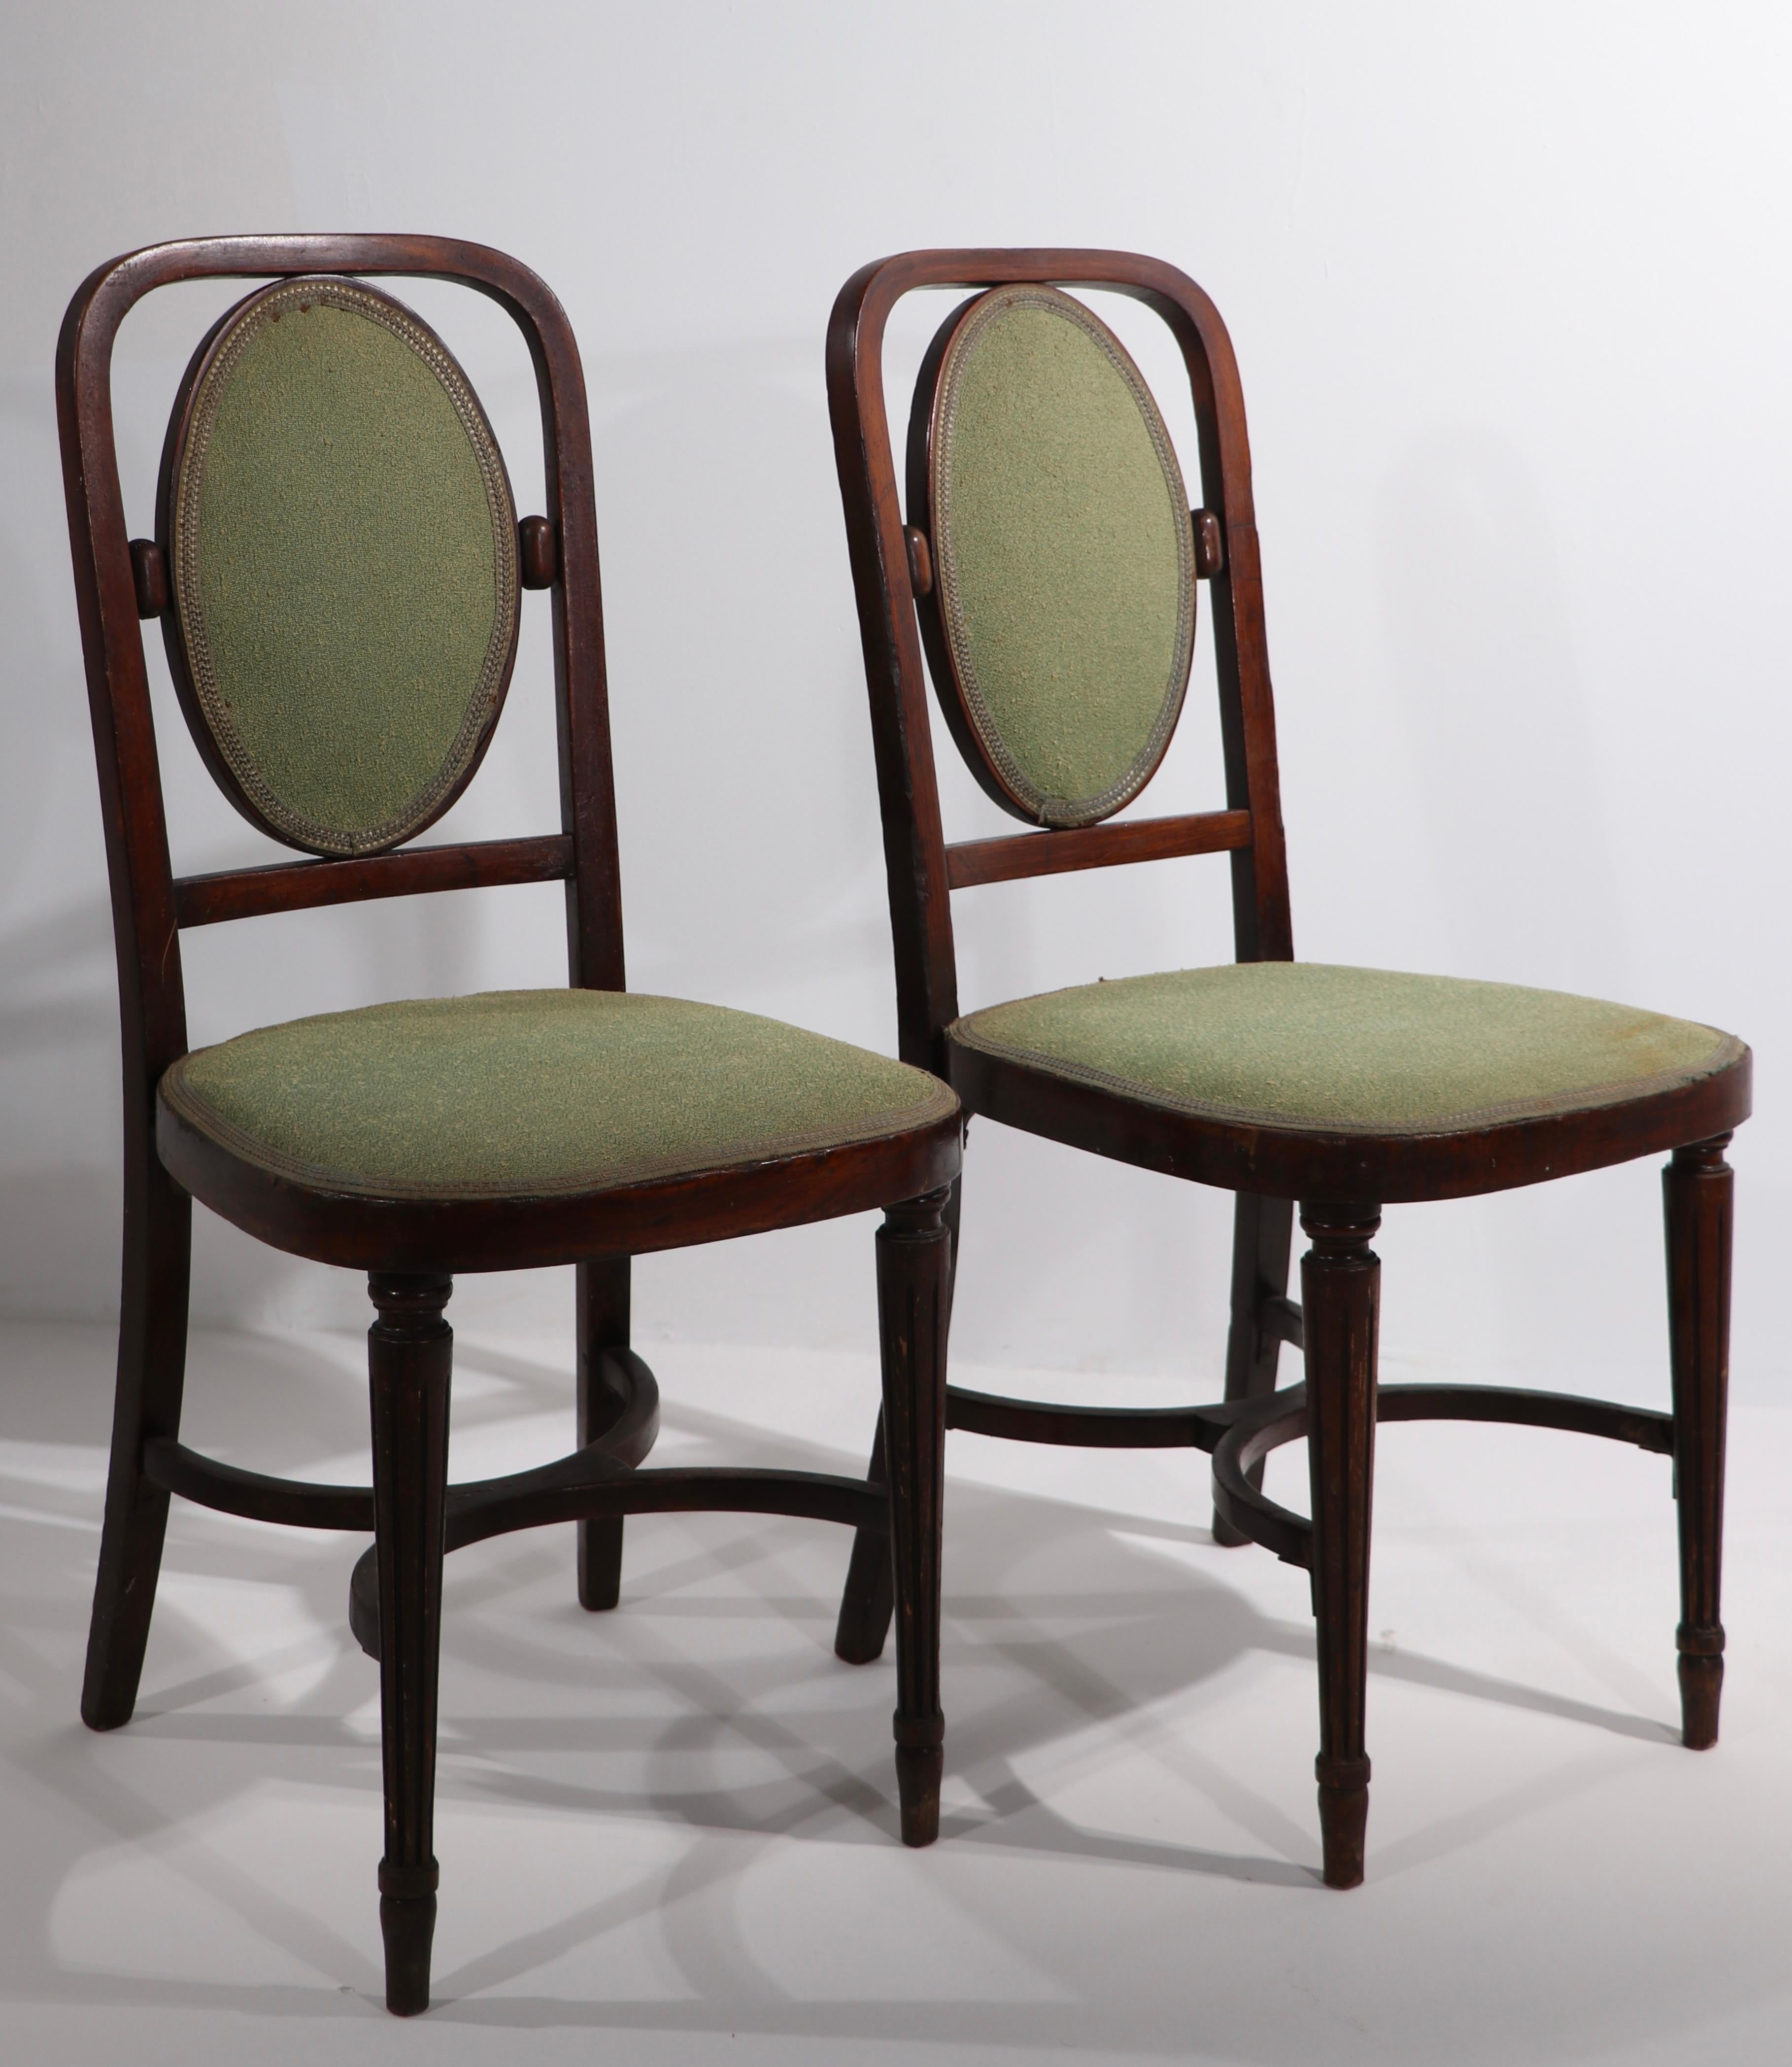 Near pair of Vienna Secessionist side chairs, design attributed to Joseph Hoffman. The chairs match with the exception of the back of the backrest, which is exposed wood on one, and upholstered on the other (see images). Both are structurally sound,